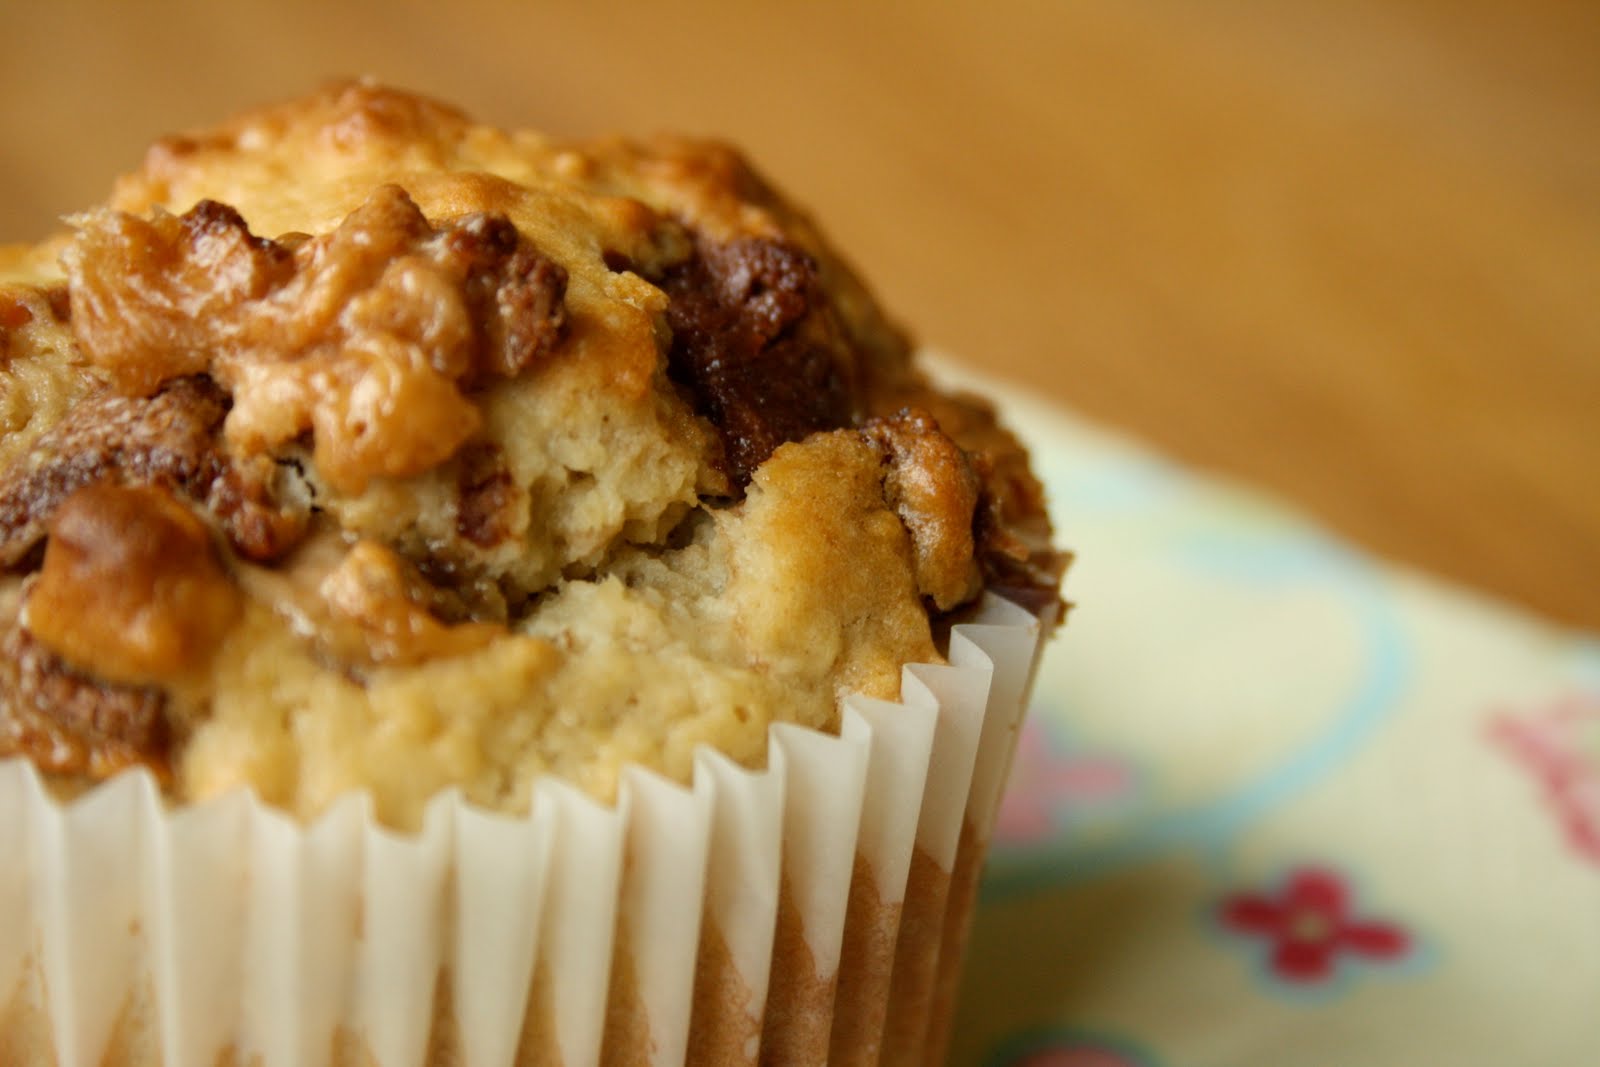 HALF A POT OF CREAM: Snickers &amp; Peanut Butter Muffins